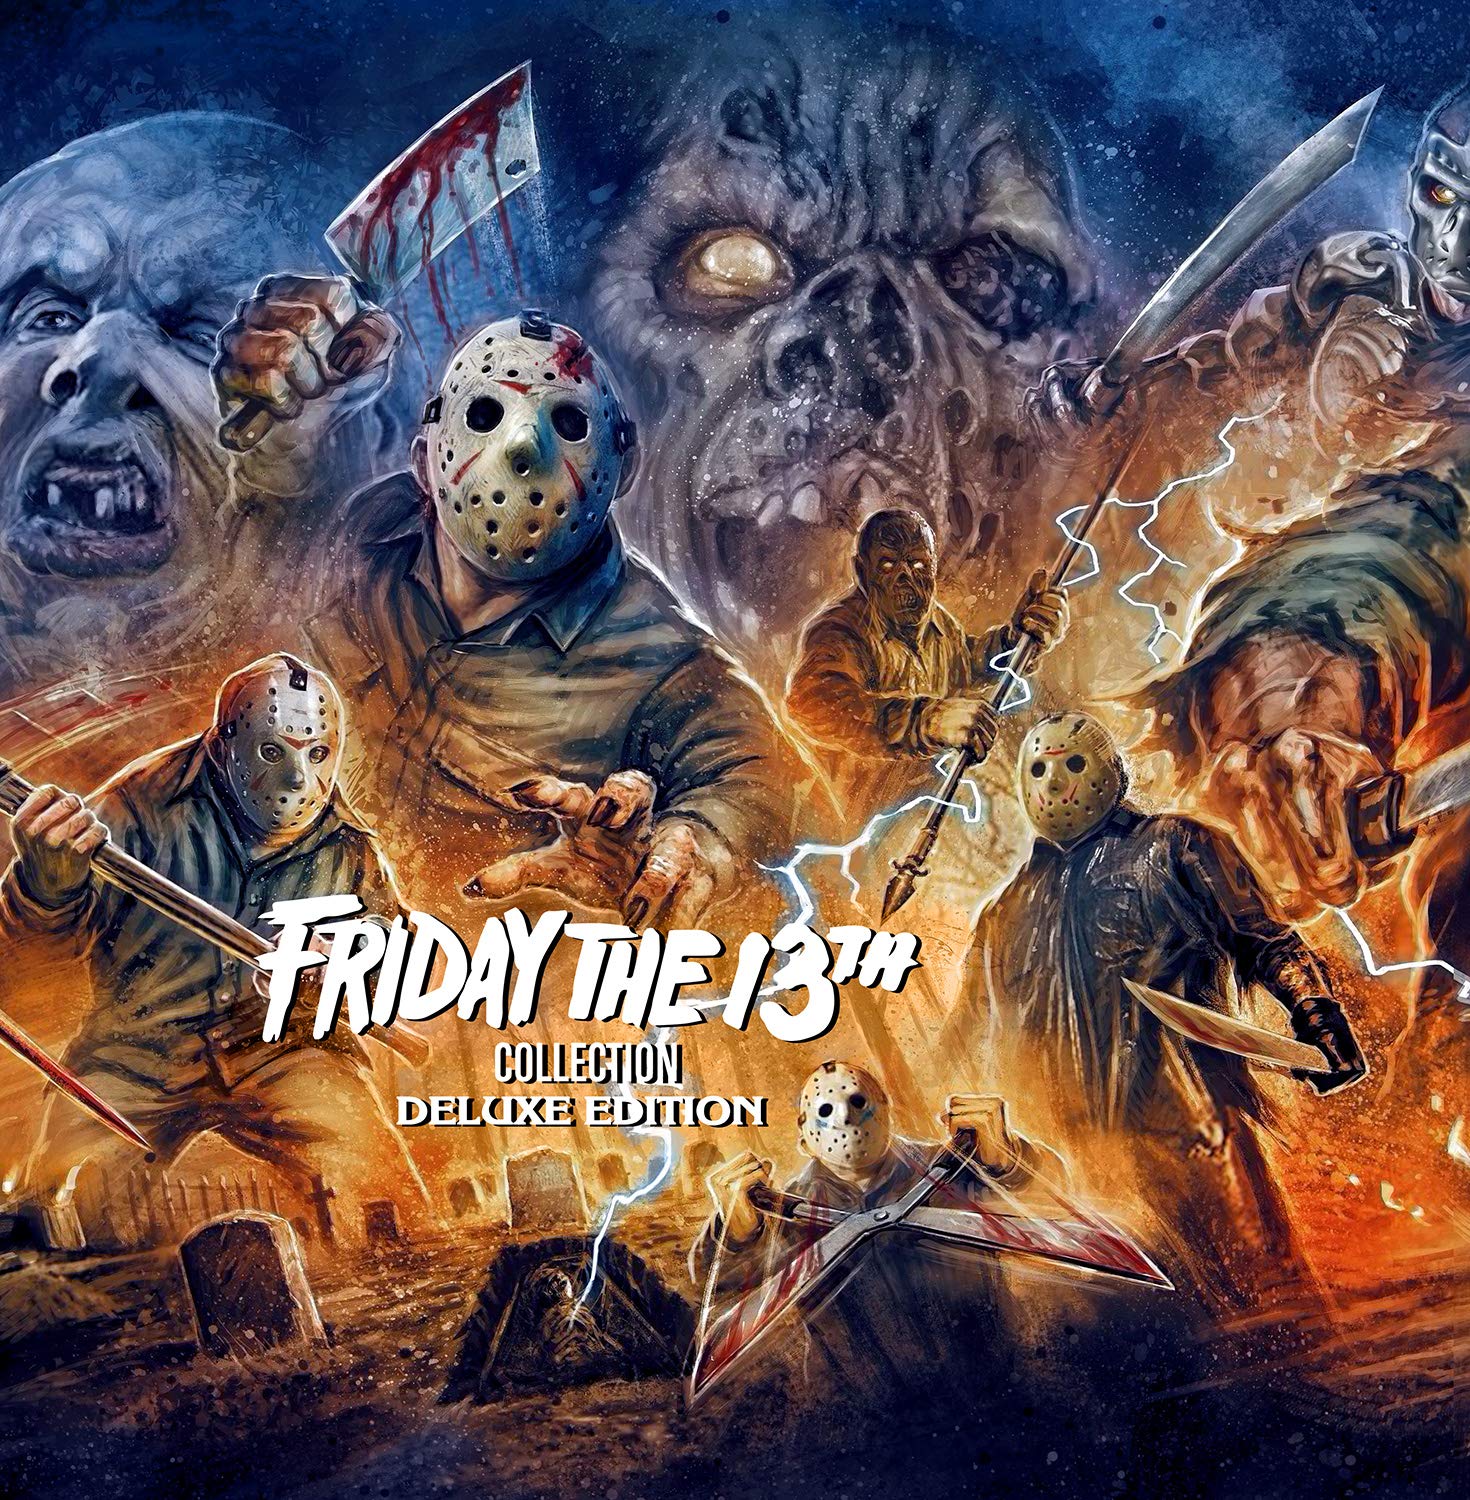 New Limited Edition 4k UHD Steelbook Of Friday The 13th 1980